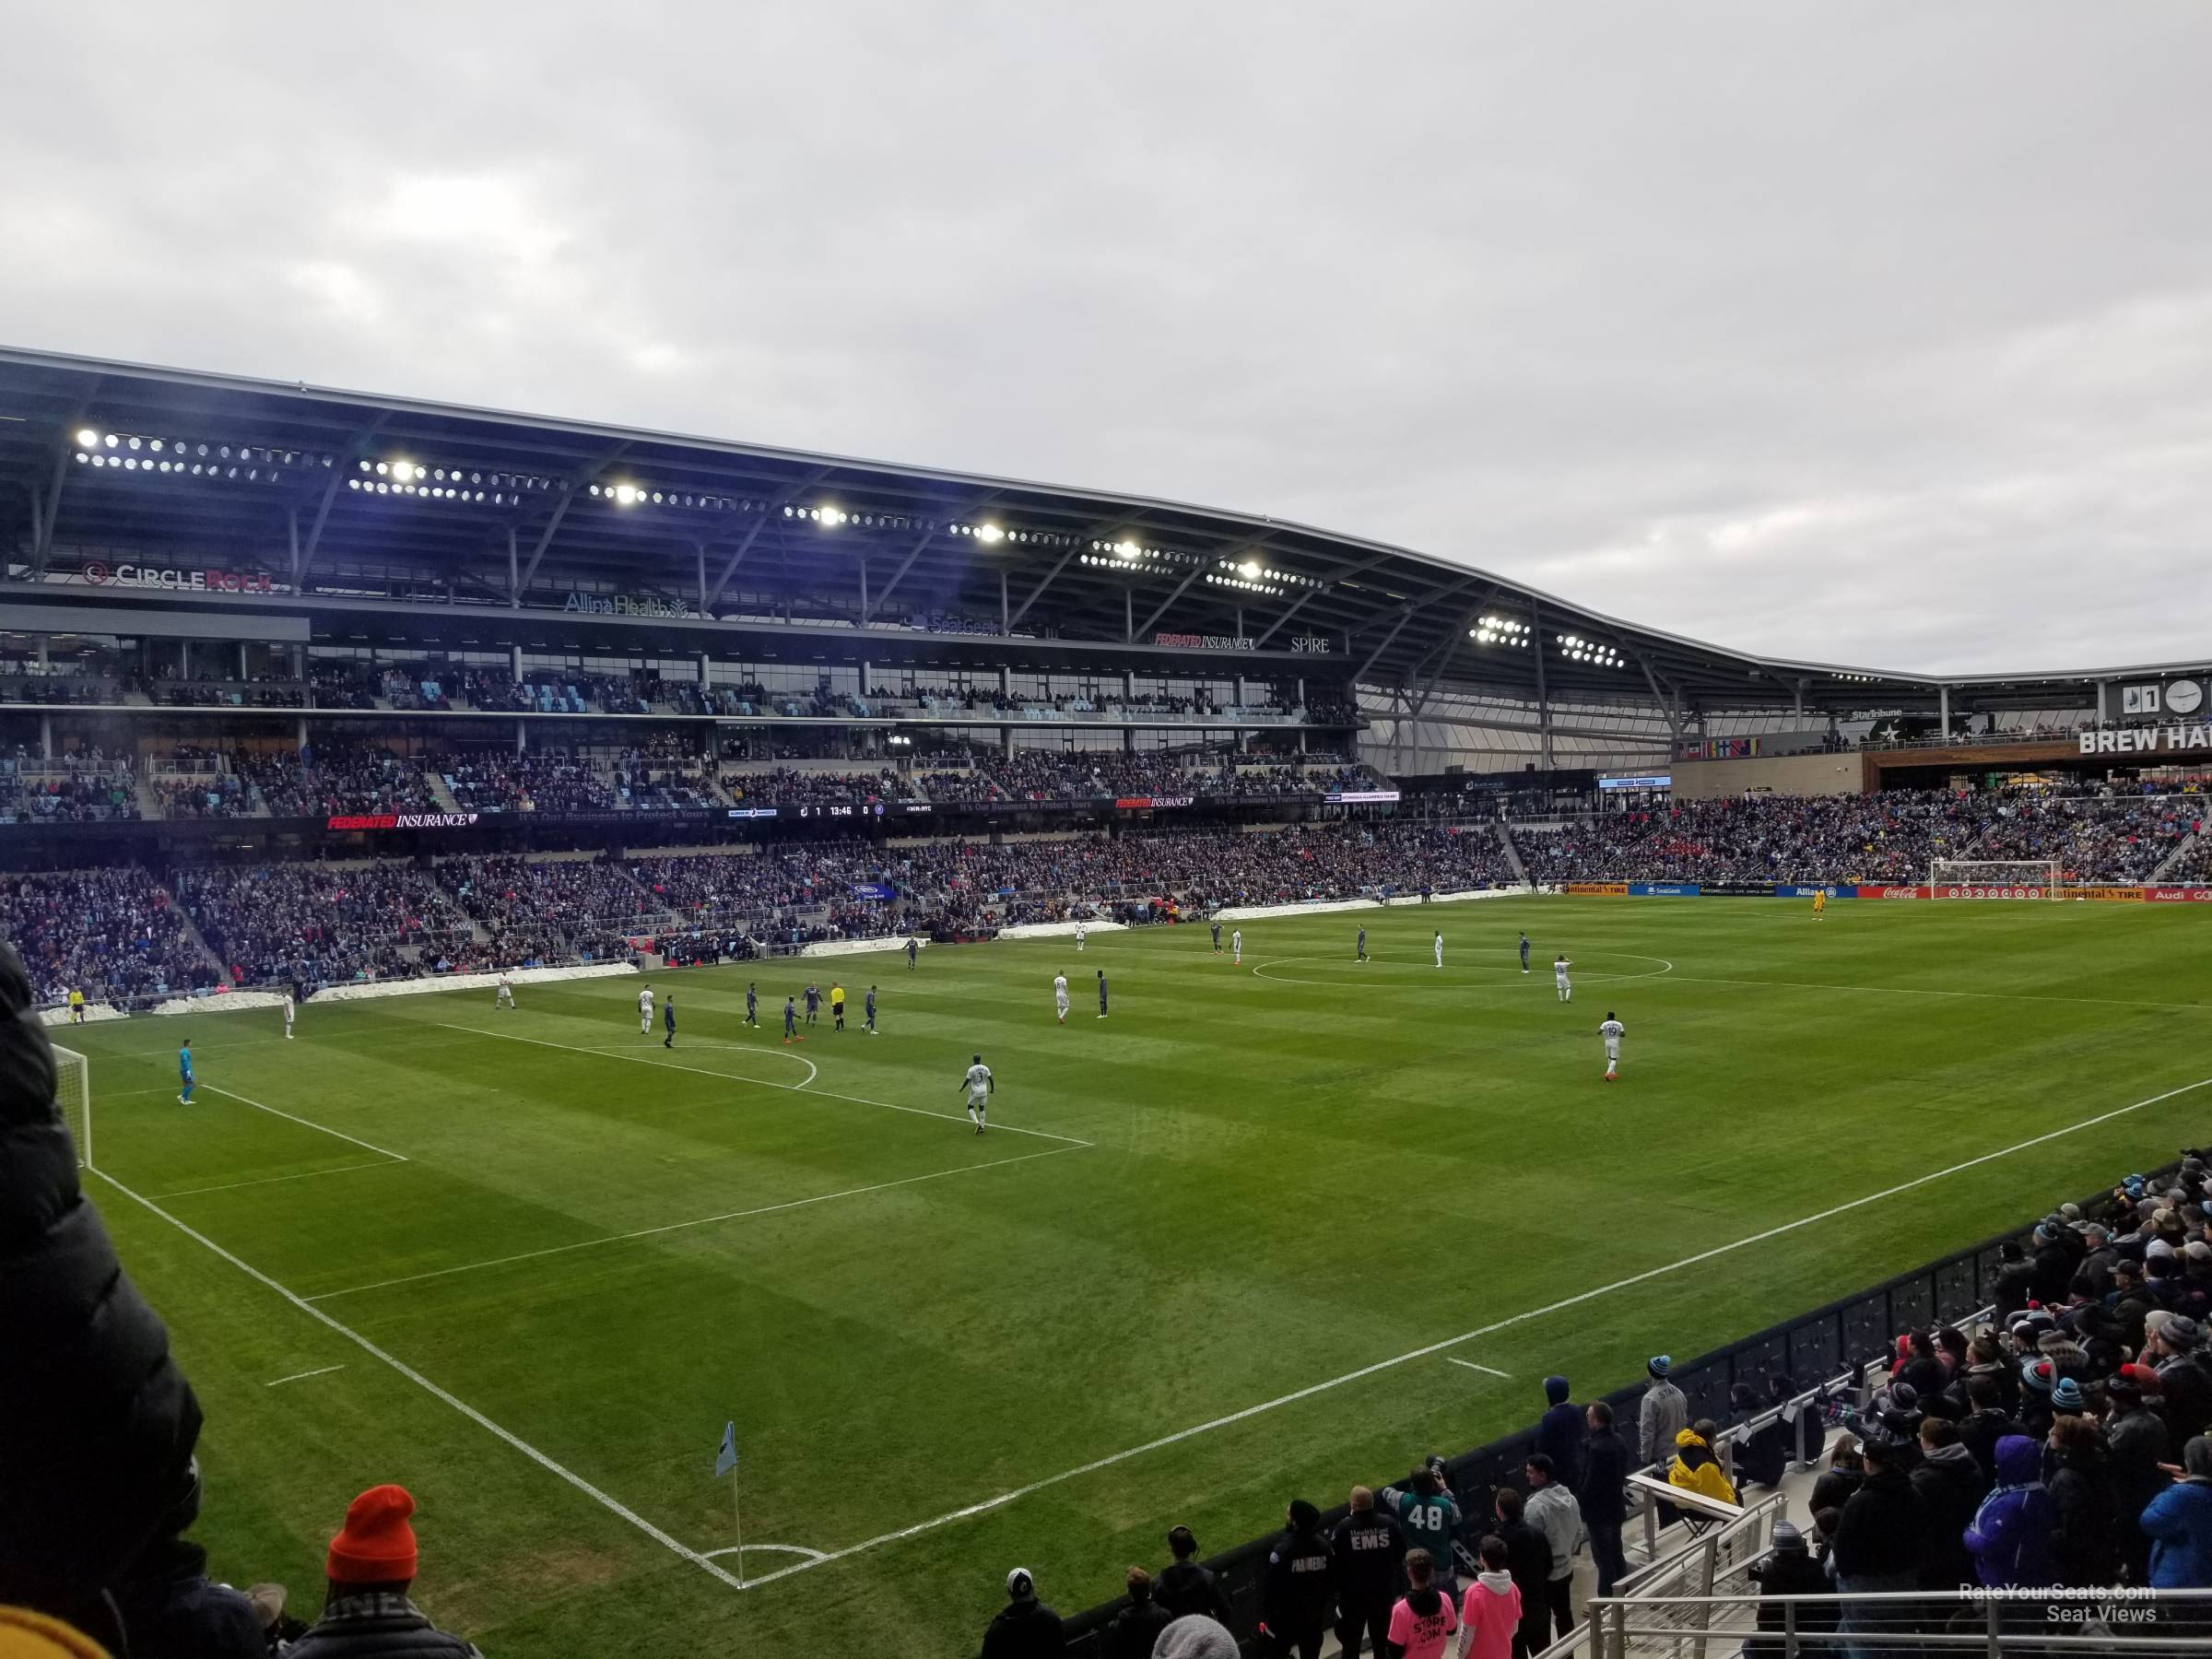 section 18, row 9 seat view  - allianz field